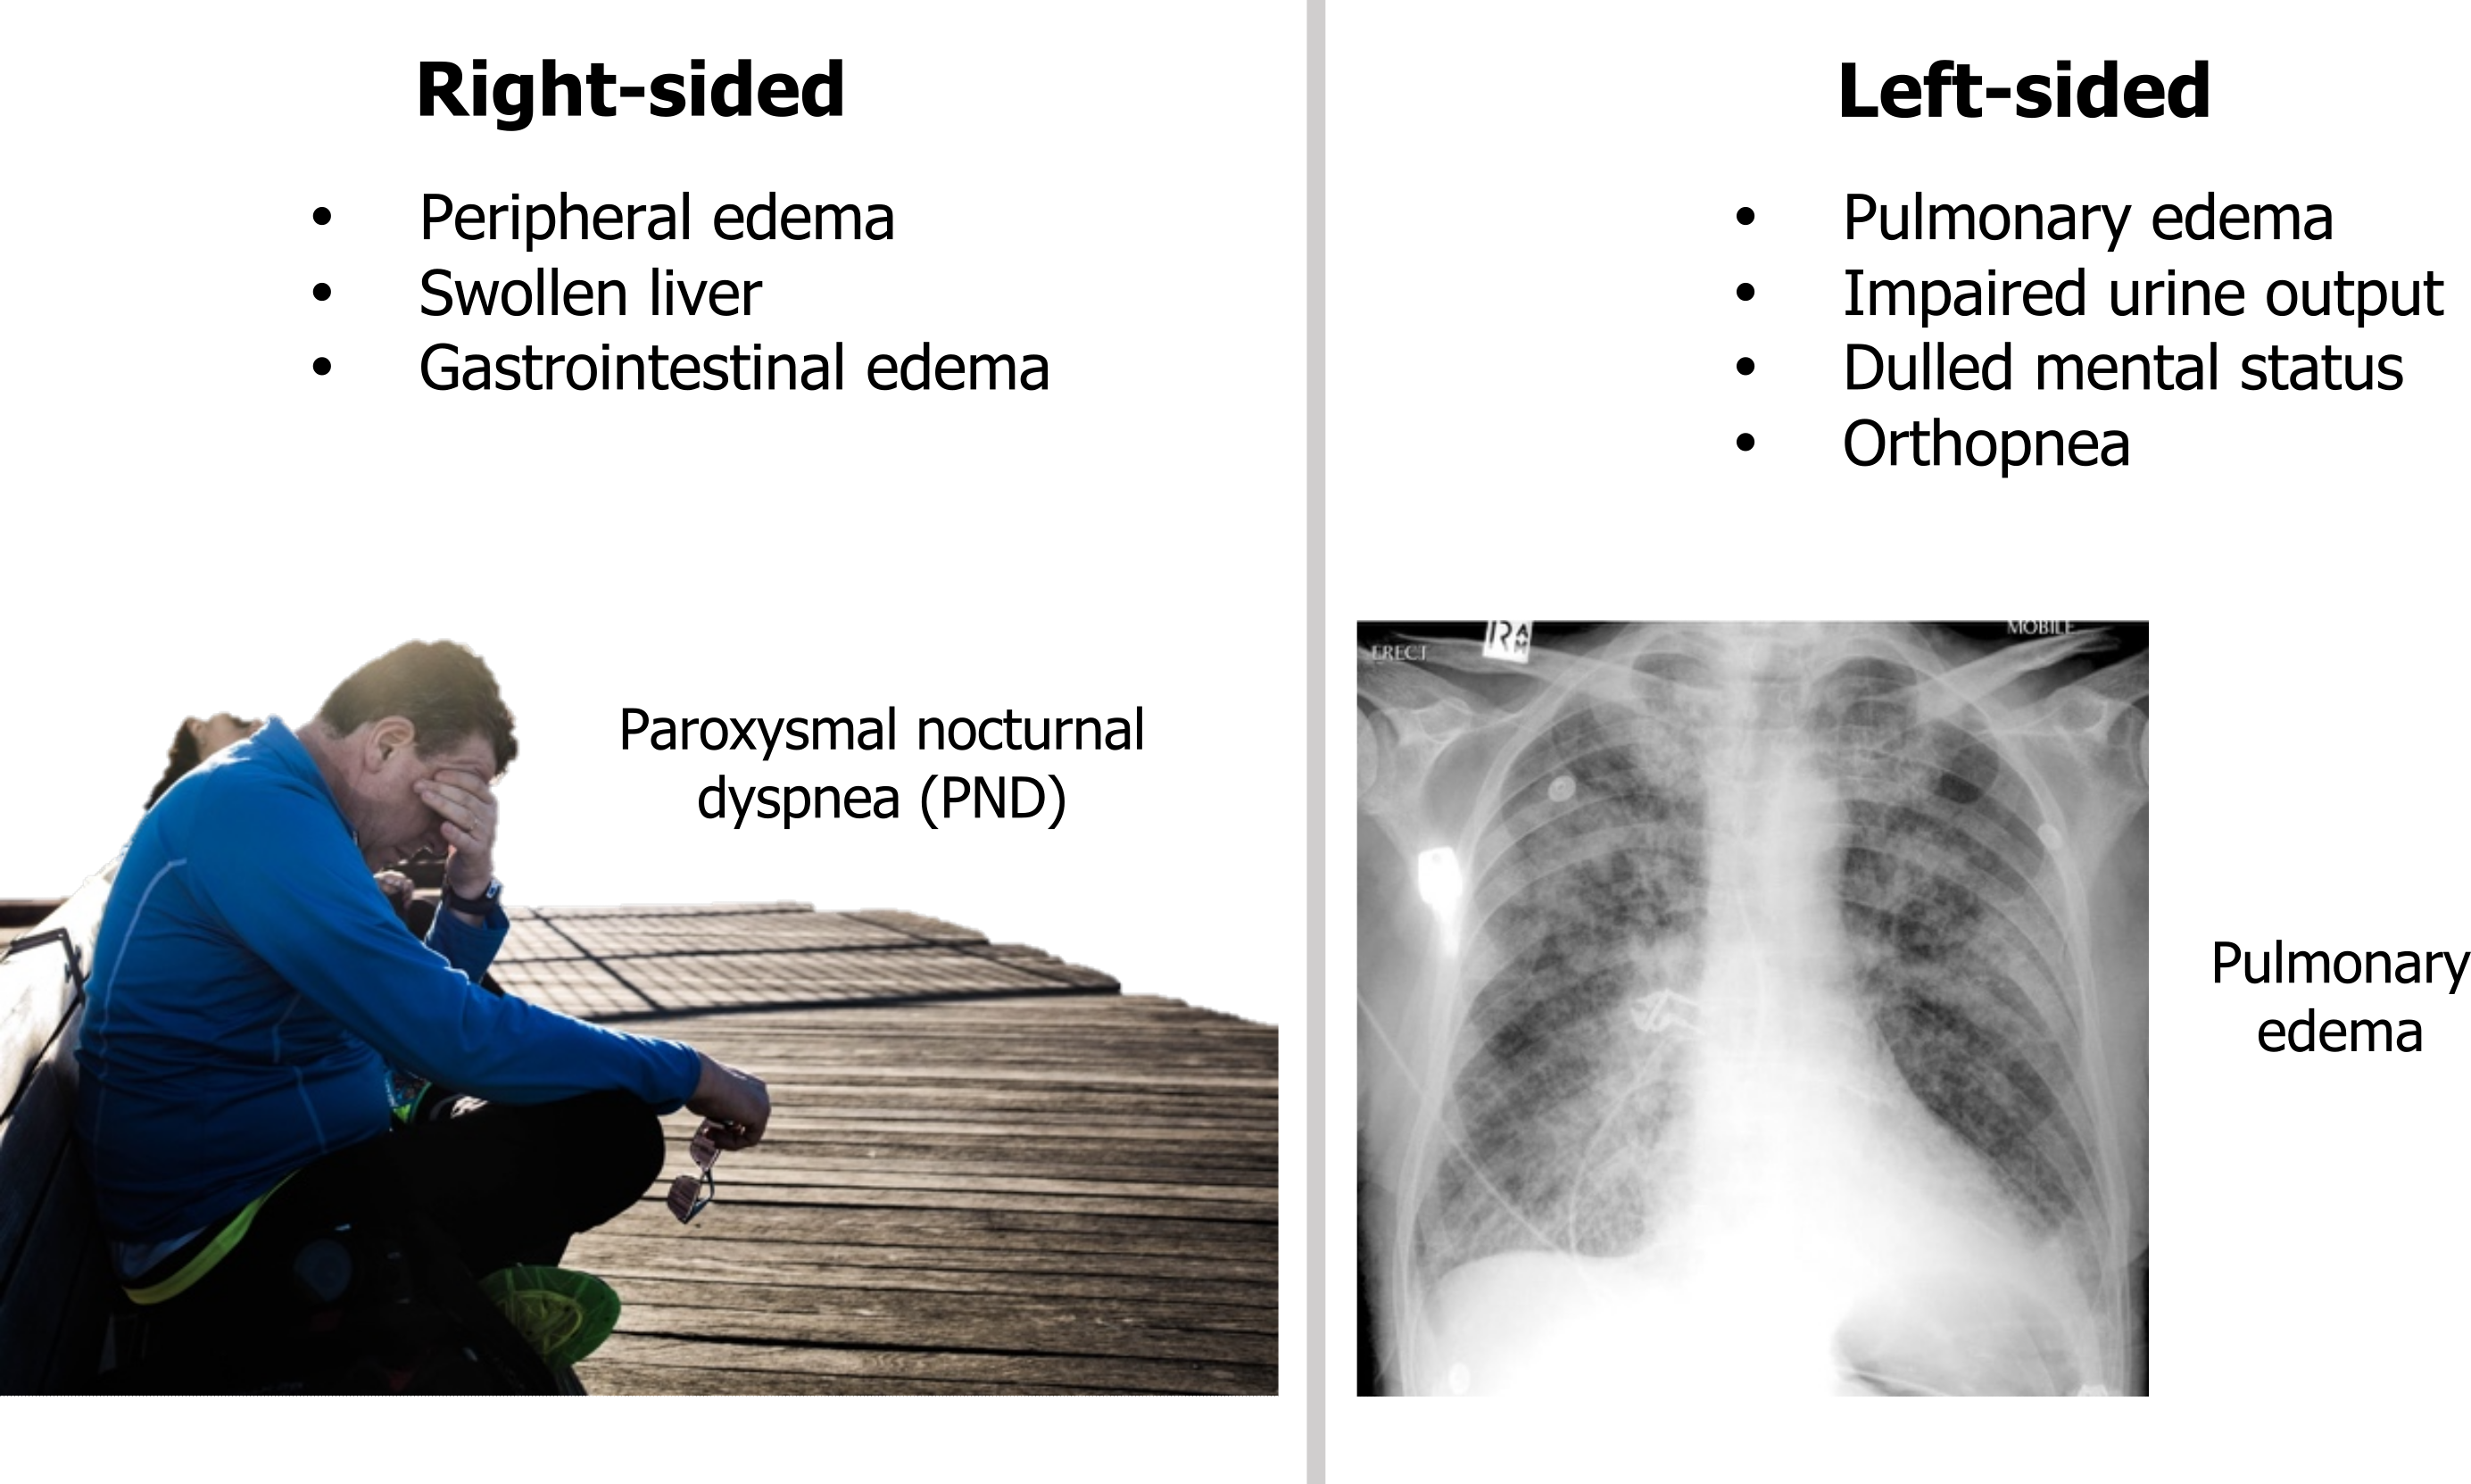 Right-sided: peripheral edema, swollen liver, and GI edema. Figure shows a man sitting upright on the ground leaning his head into his hand and is labeled paroxysmal nocturnal dyspnea (PND). Left-sided: pulmonary edema, impaired urine output, dulled mental status, orthopnea. Figure shows edema in a chest radiograph.